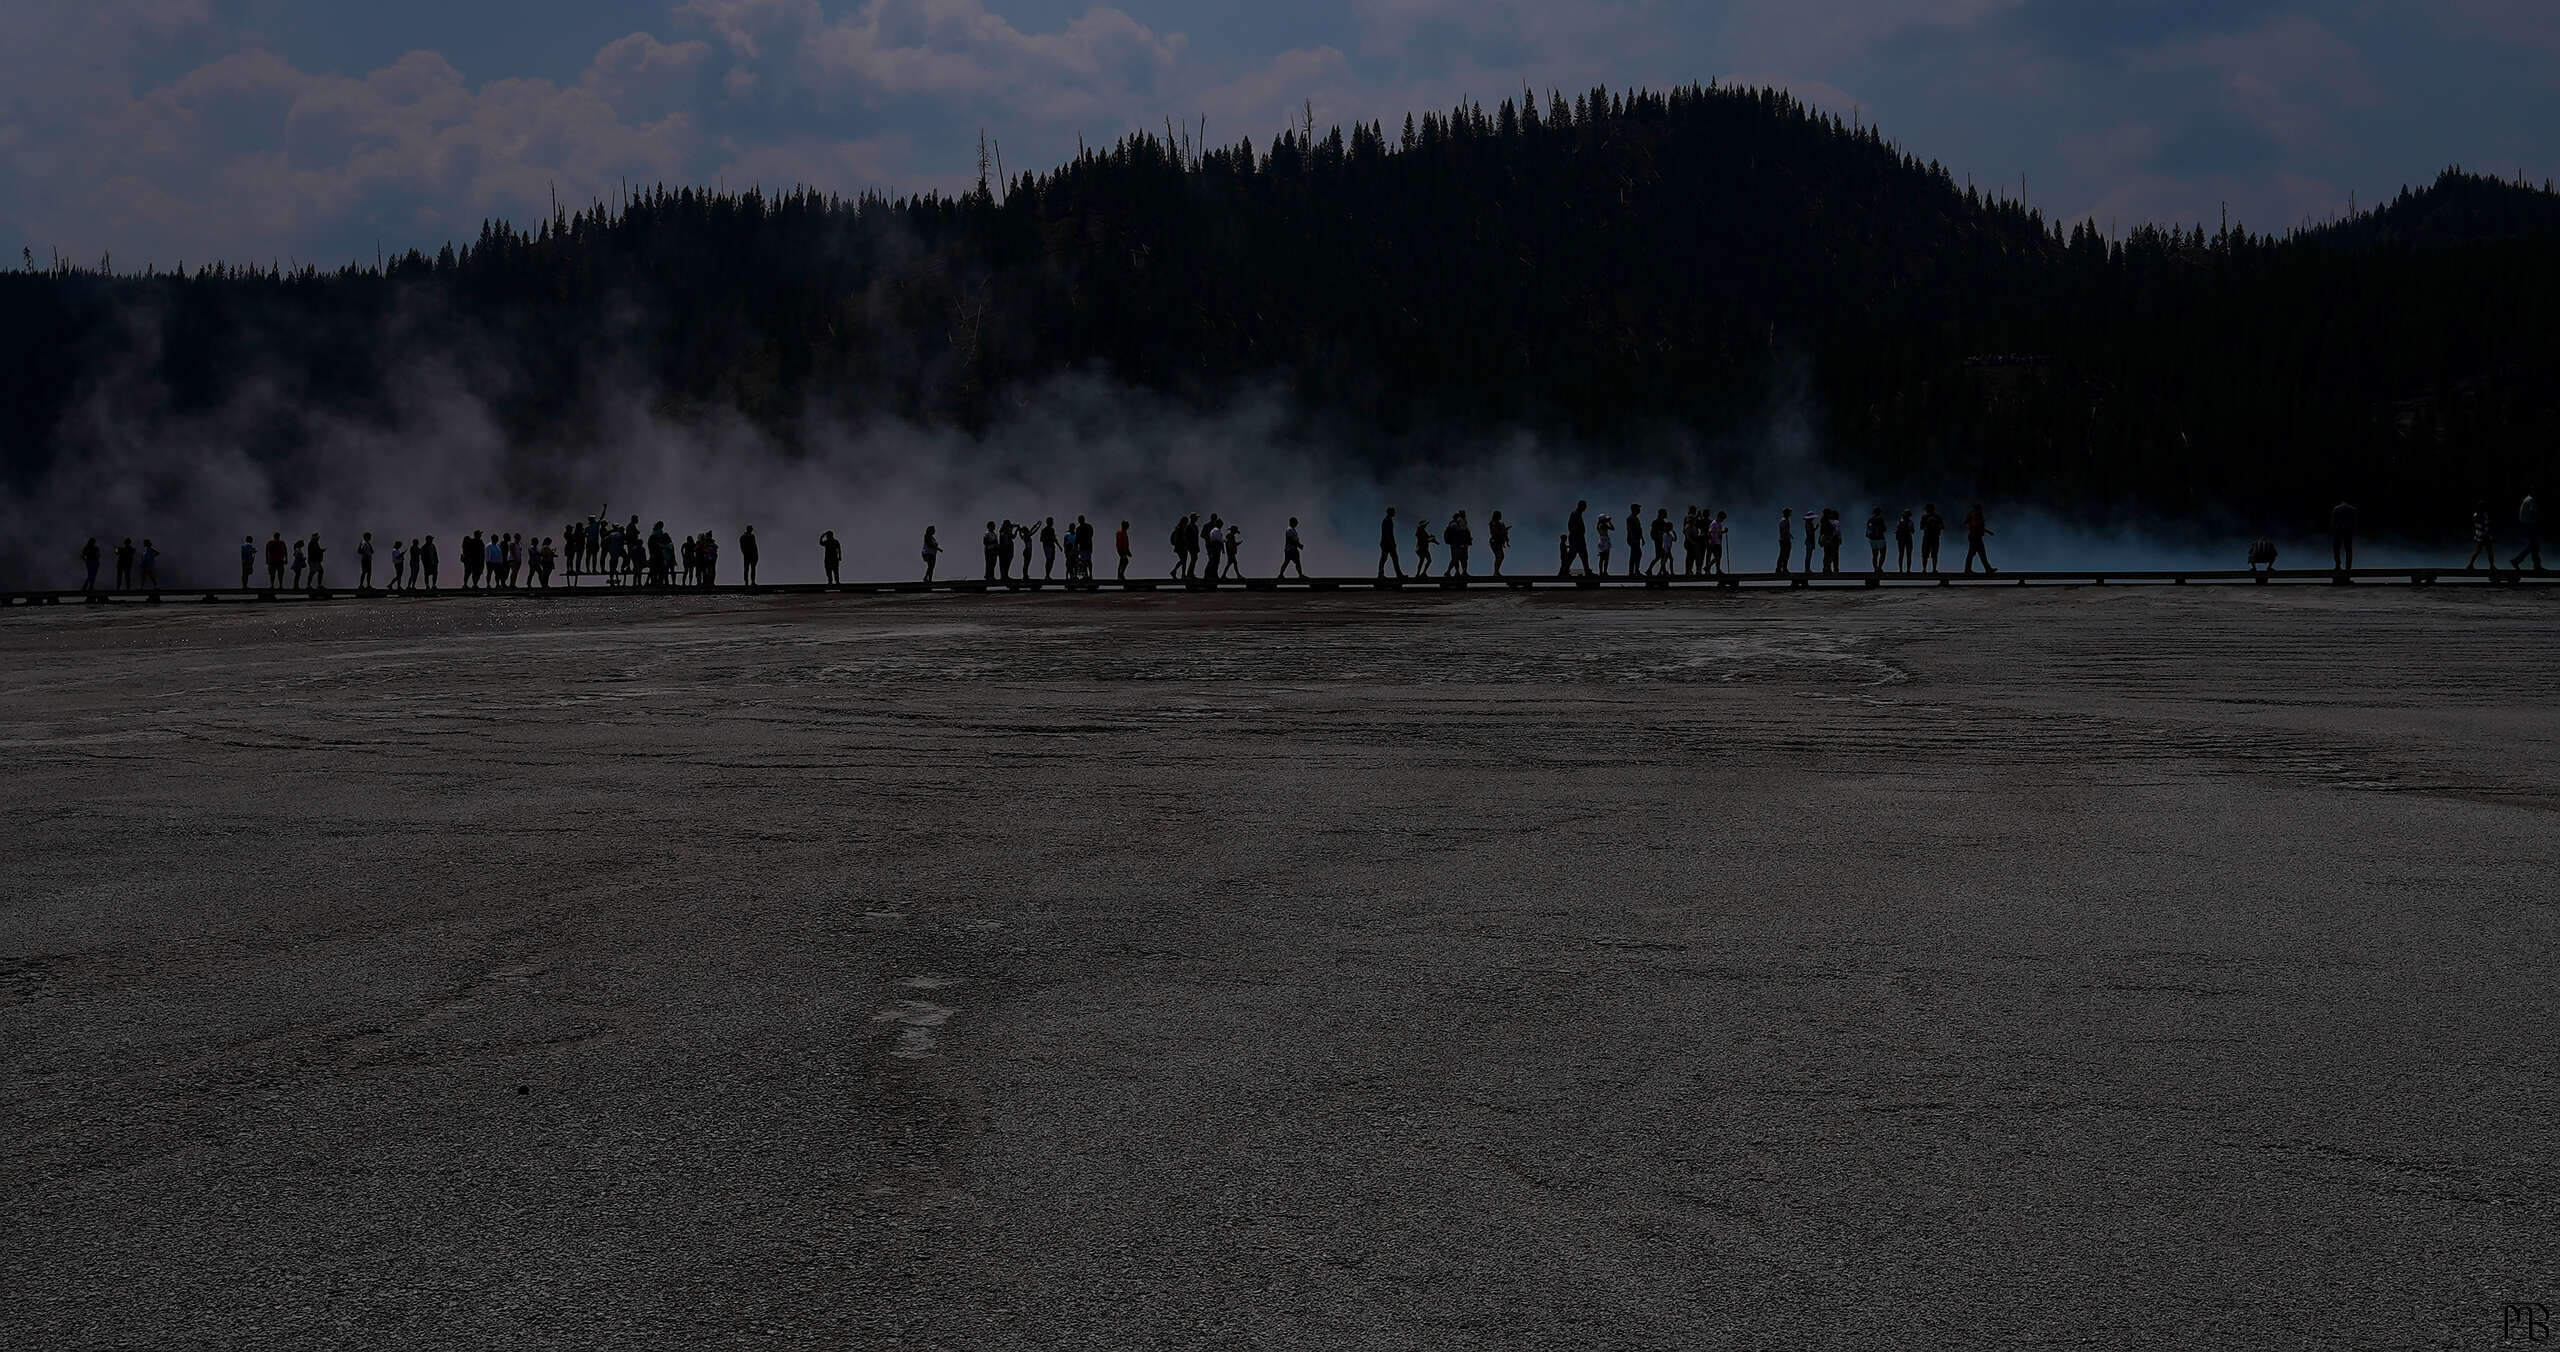 A silhouetted view of people walking near the Grand Prismatic Spring